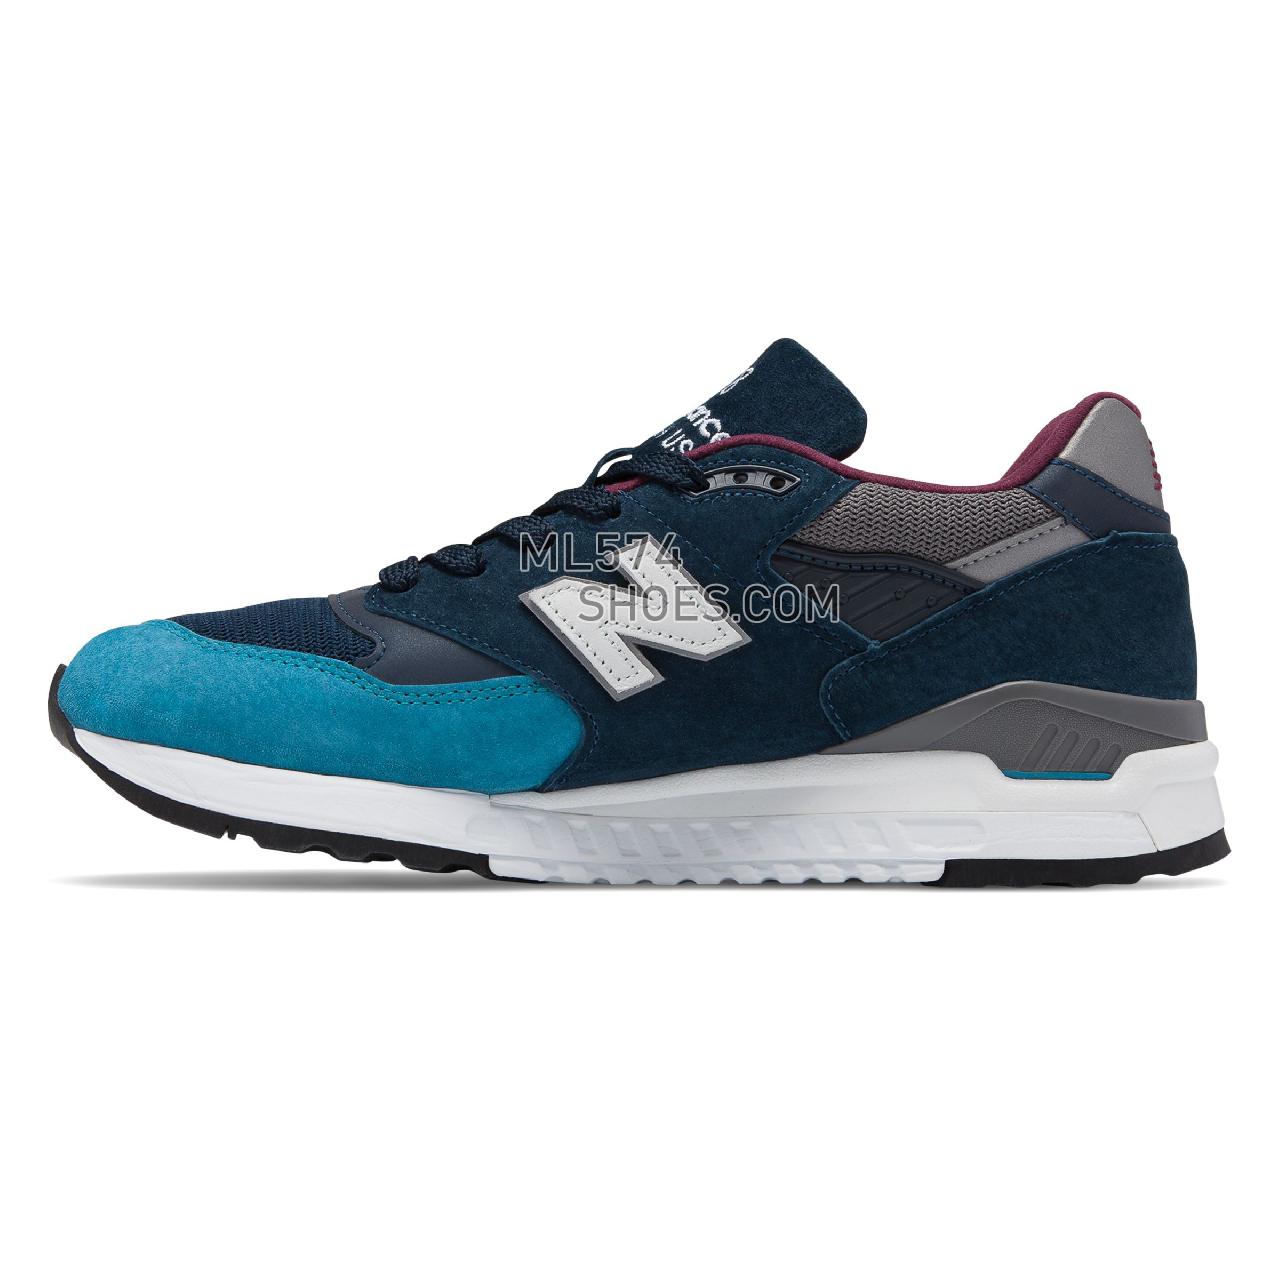 New Balance Made in US 998 Suede - Men's 998 Suede Classic M998-PSM - Blue with Grey - M998TCA